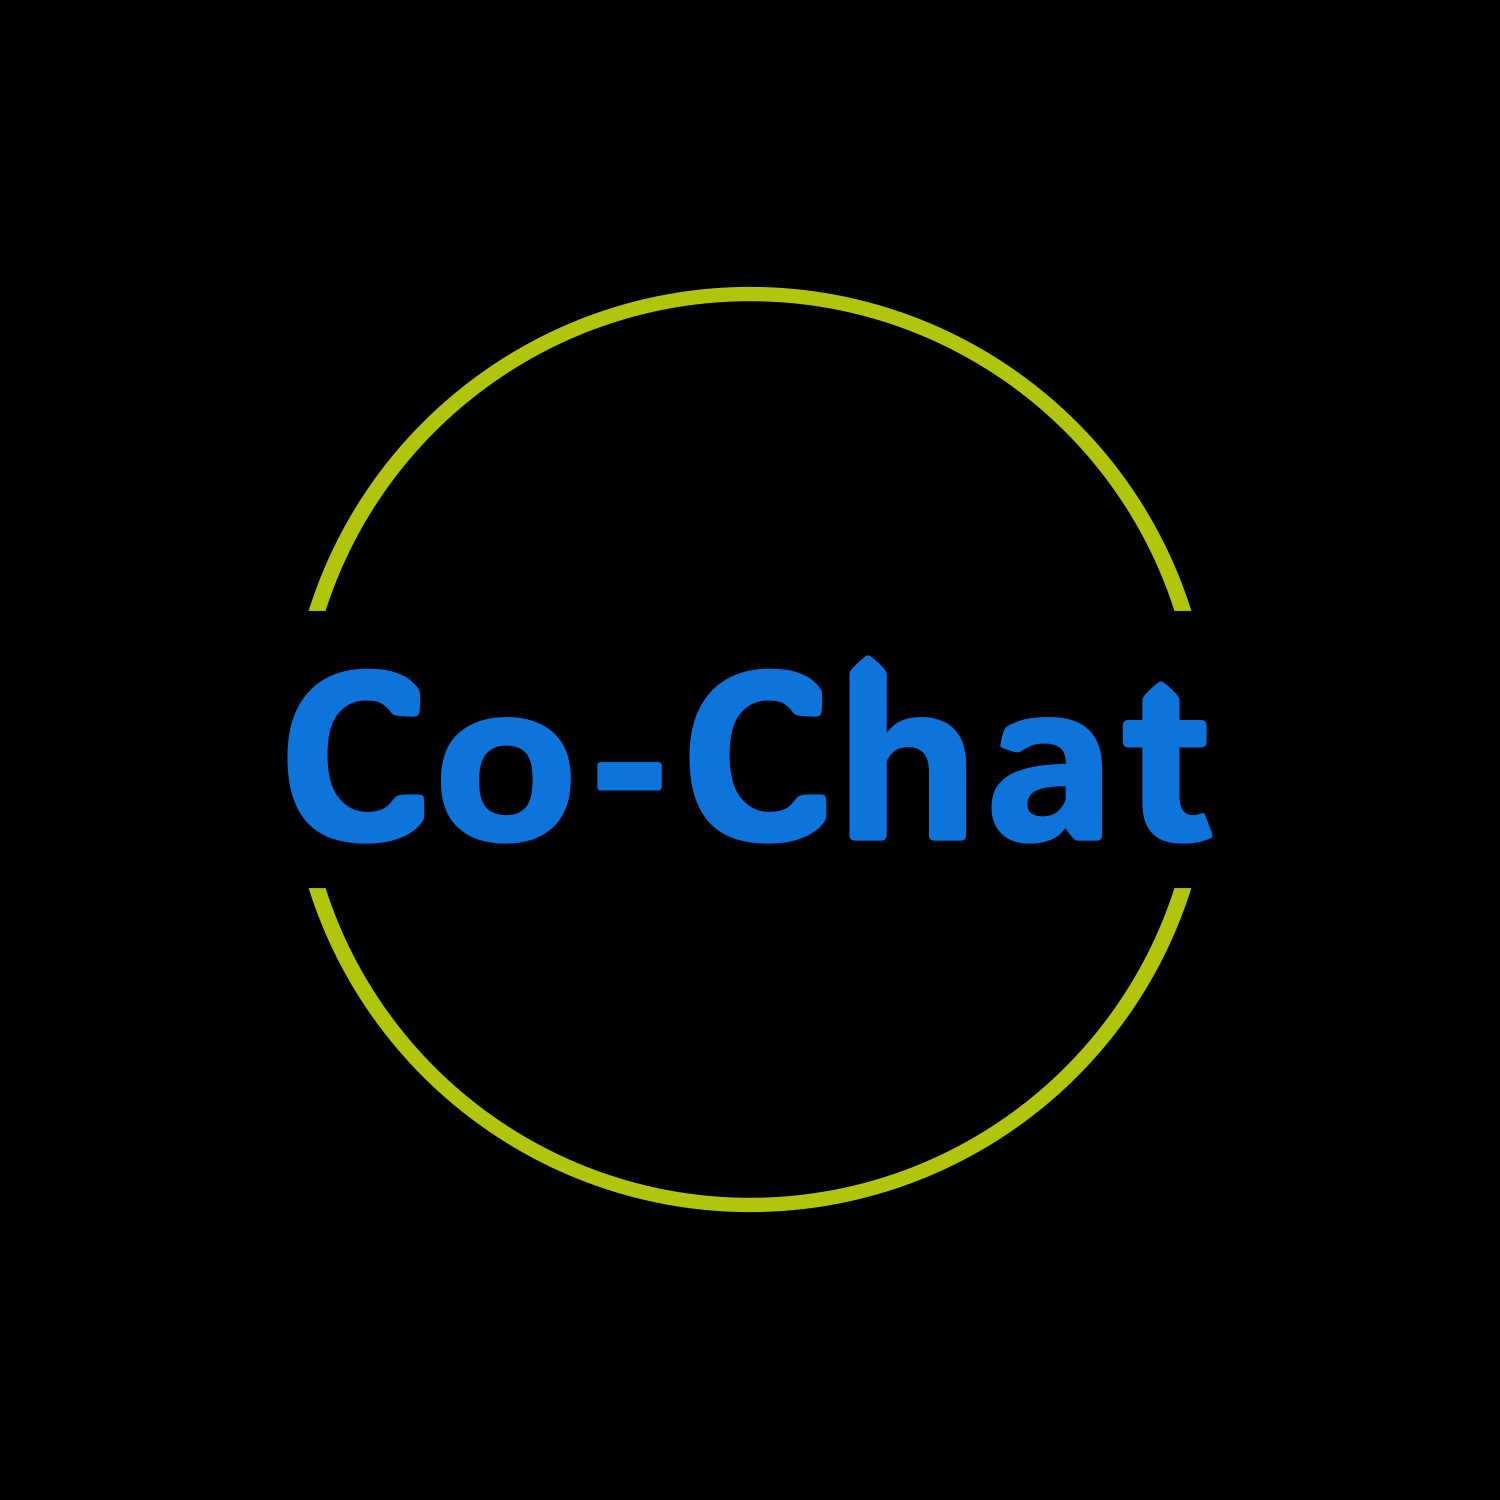 Co-Chat